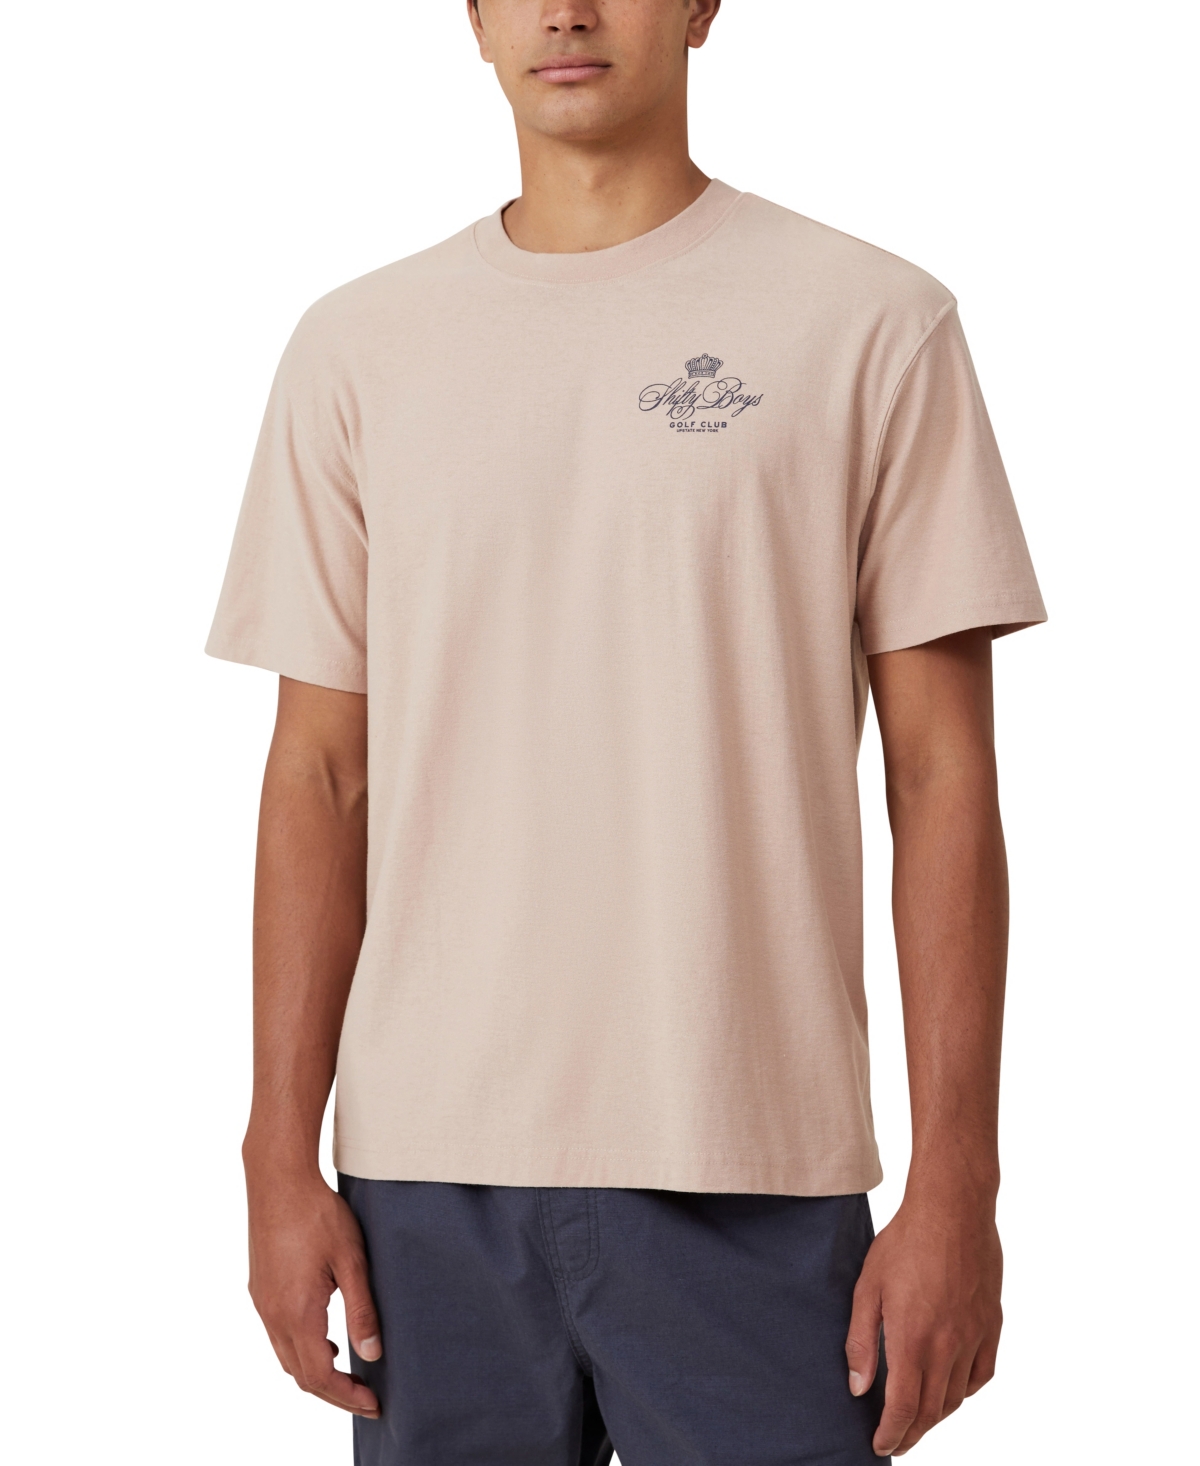 Cotton On Men's Premium Loose Fit Art T-shirt In Dusty Blossom,shifty Boys Golf Club